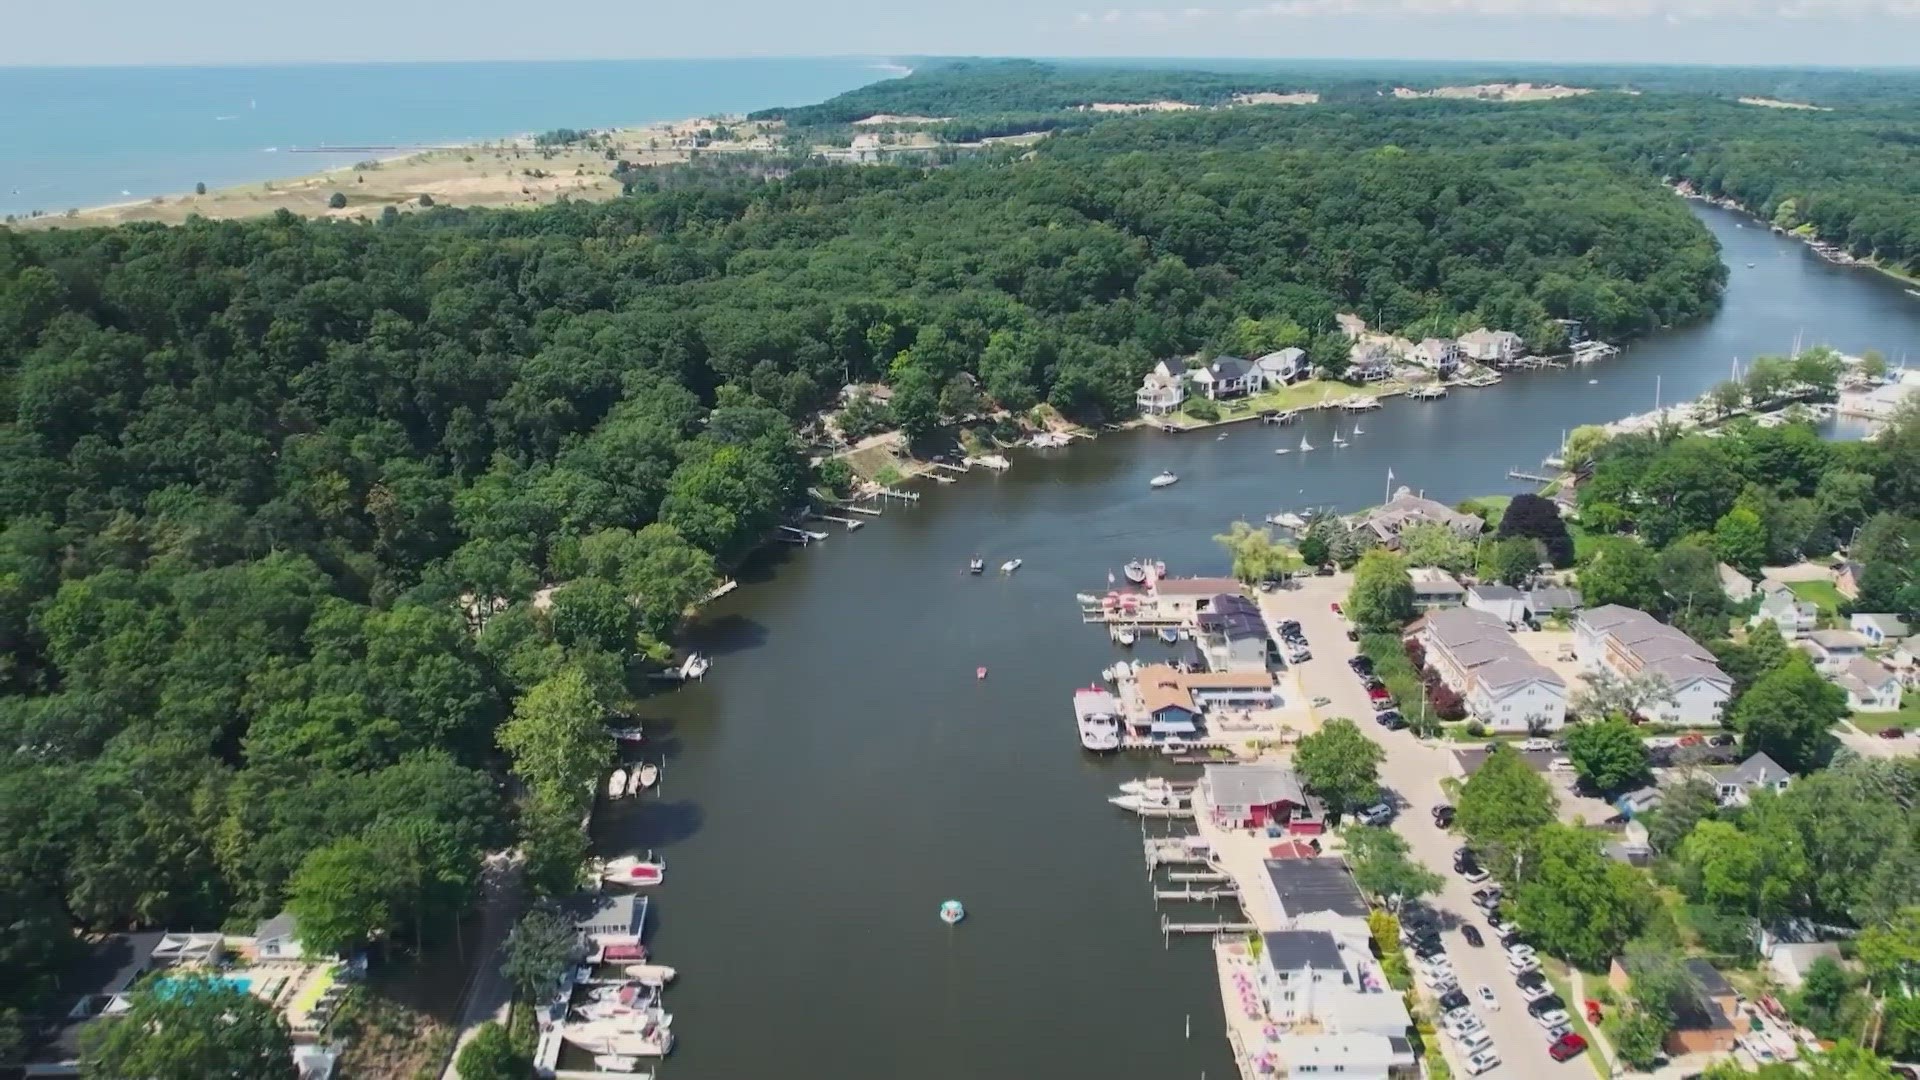 Both the Star Of Saugatuck and the Chain Ferry make up the waterborne fabric of this longtime tourist town.